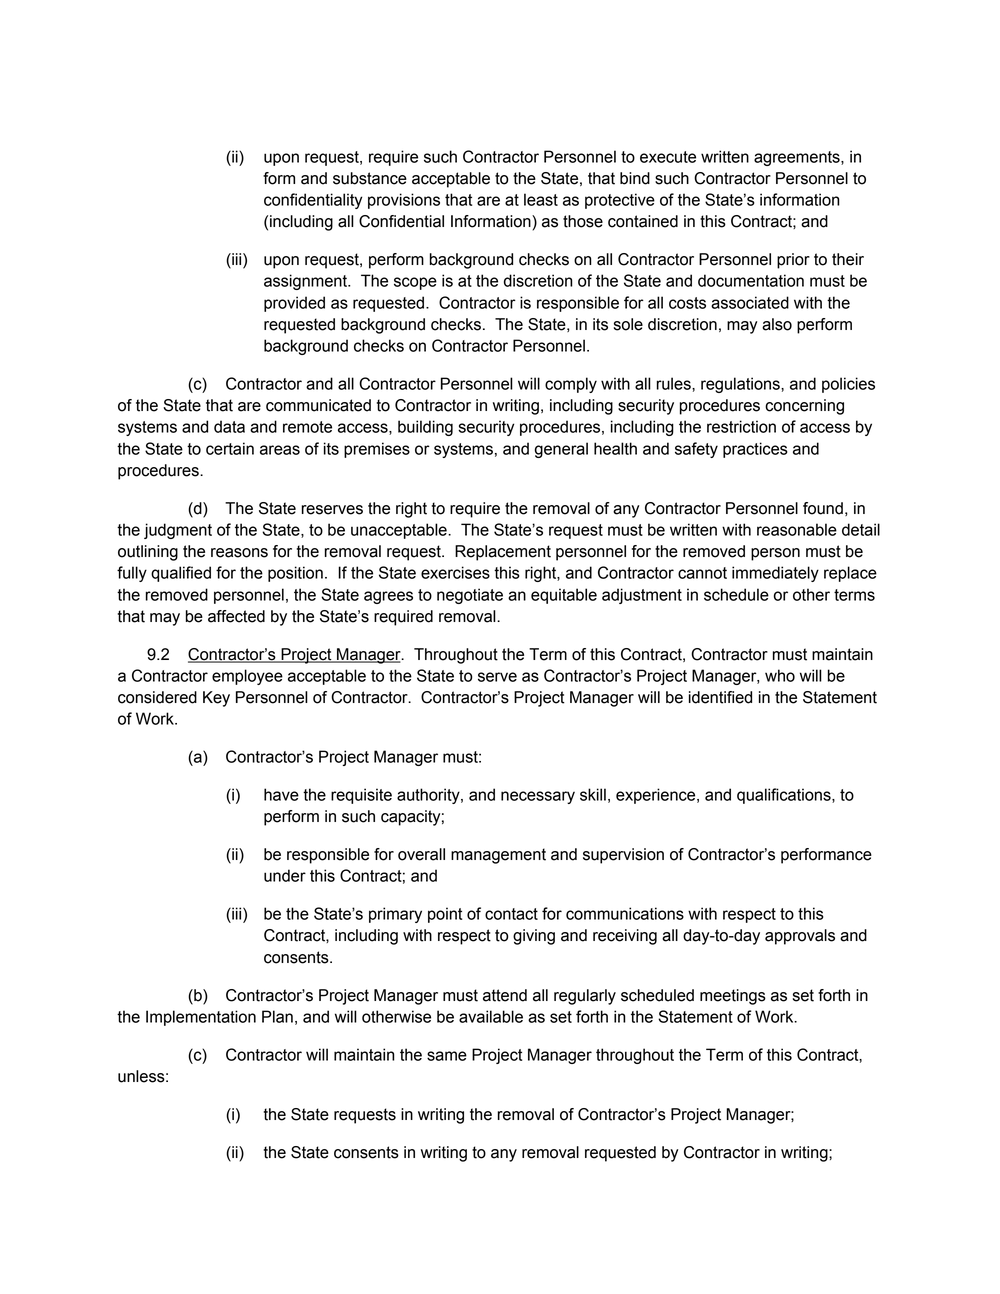 Page 14 from State of Michigan 2020 Kaseware contract